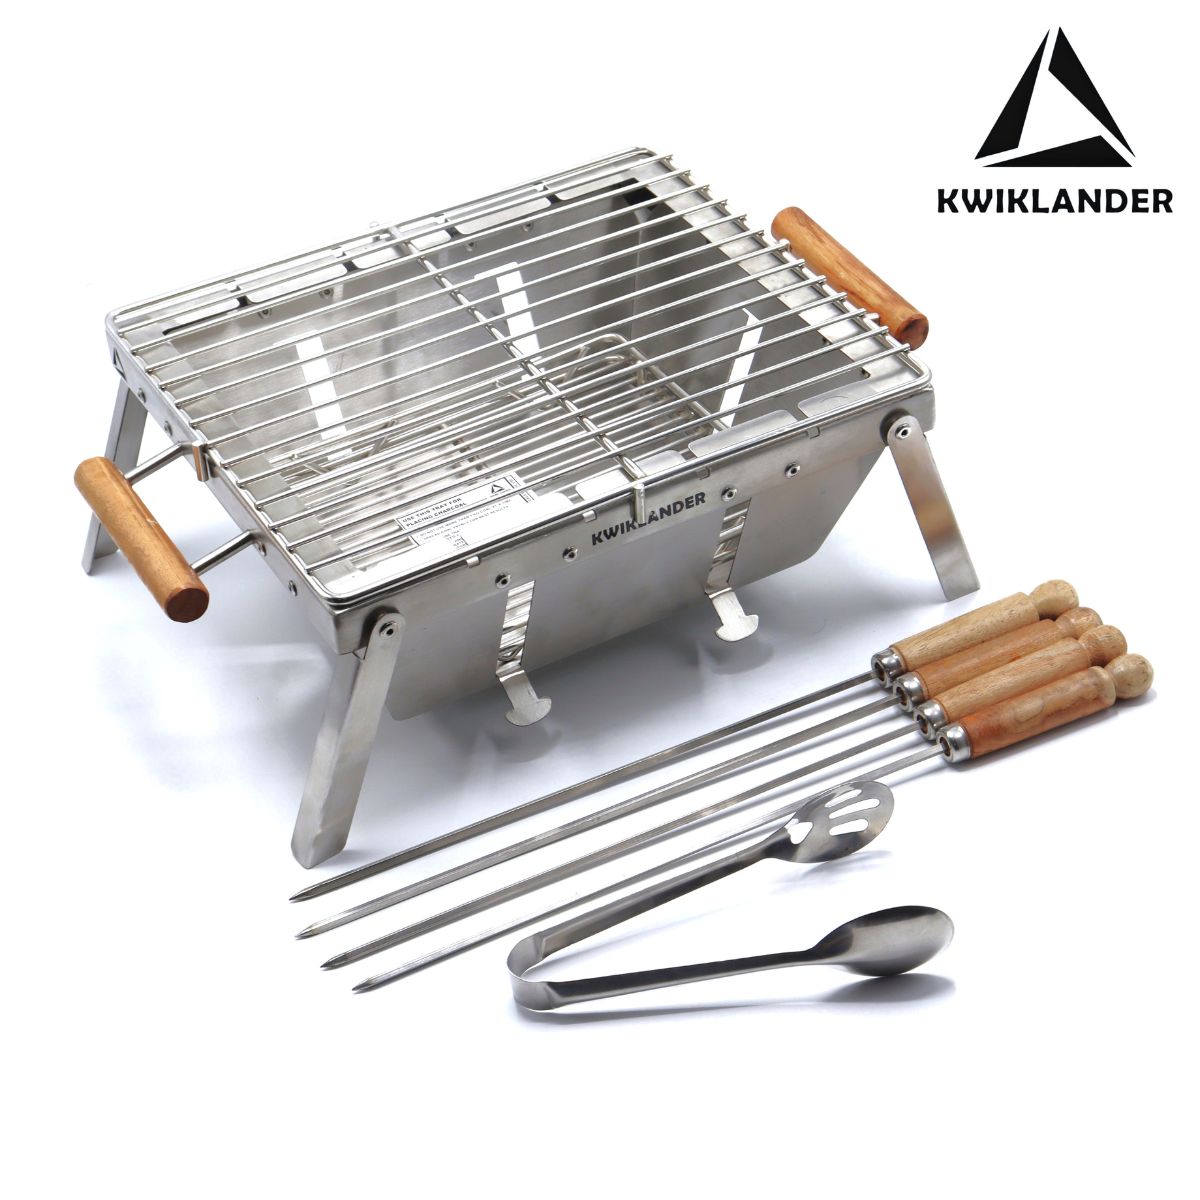 Traveler Foldable Charcoal Barbeque Grill & Top Food Grate Accessory with 4 Skewers 1